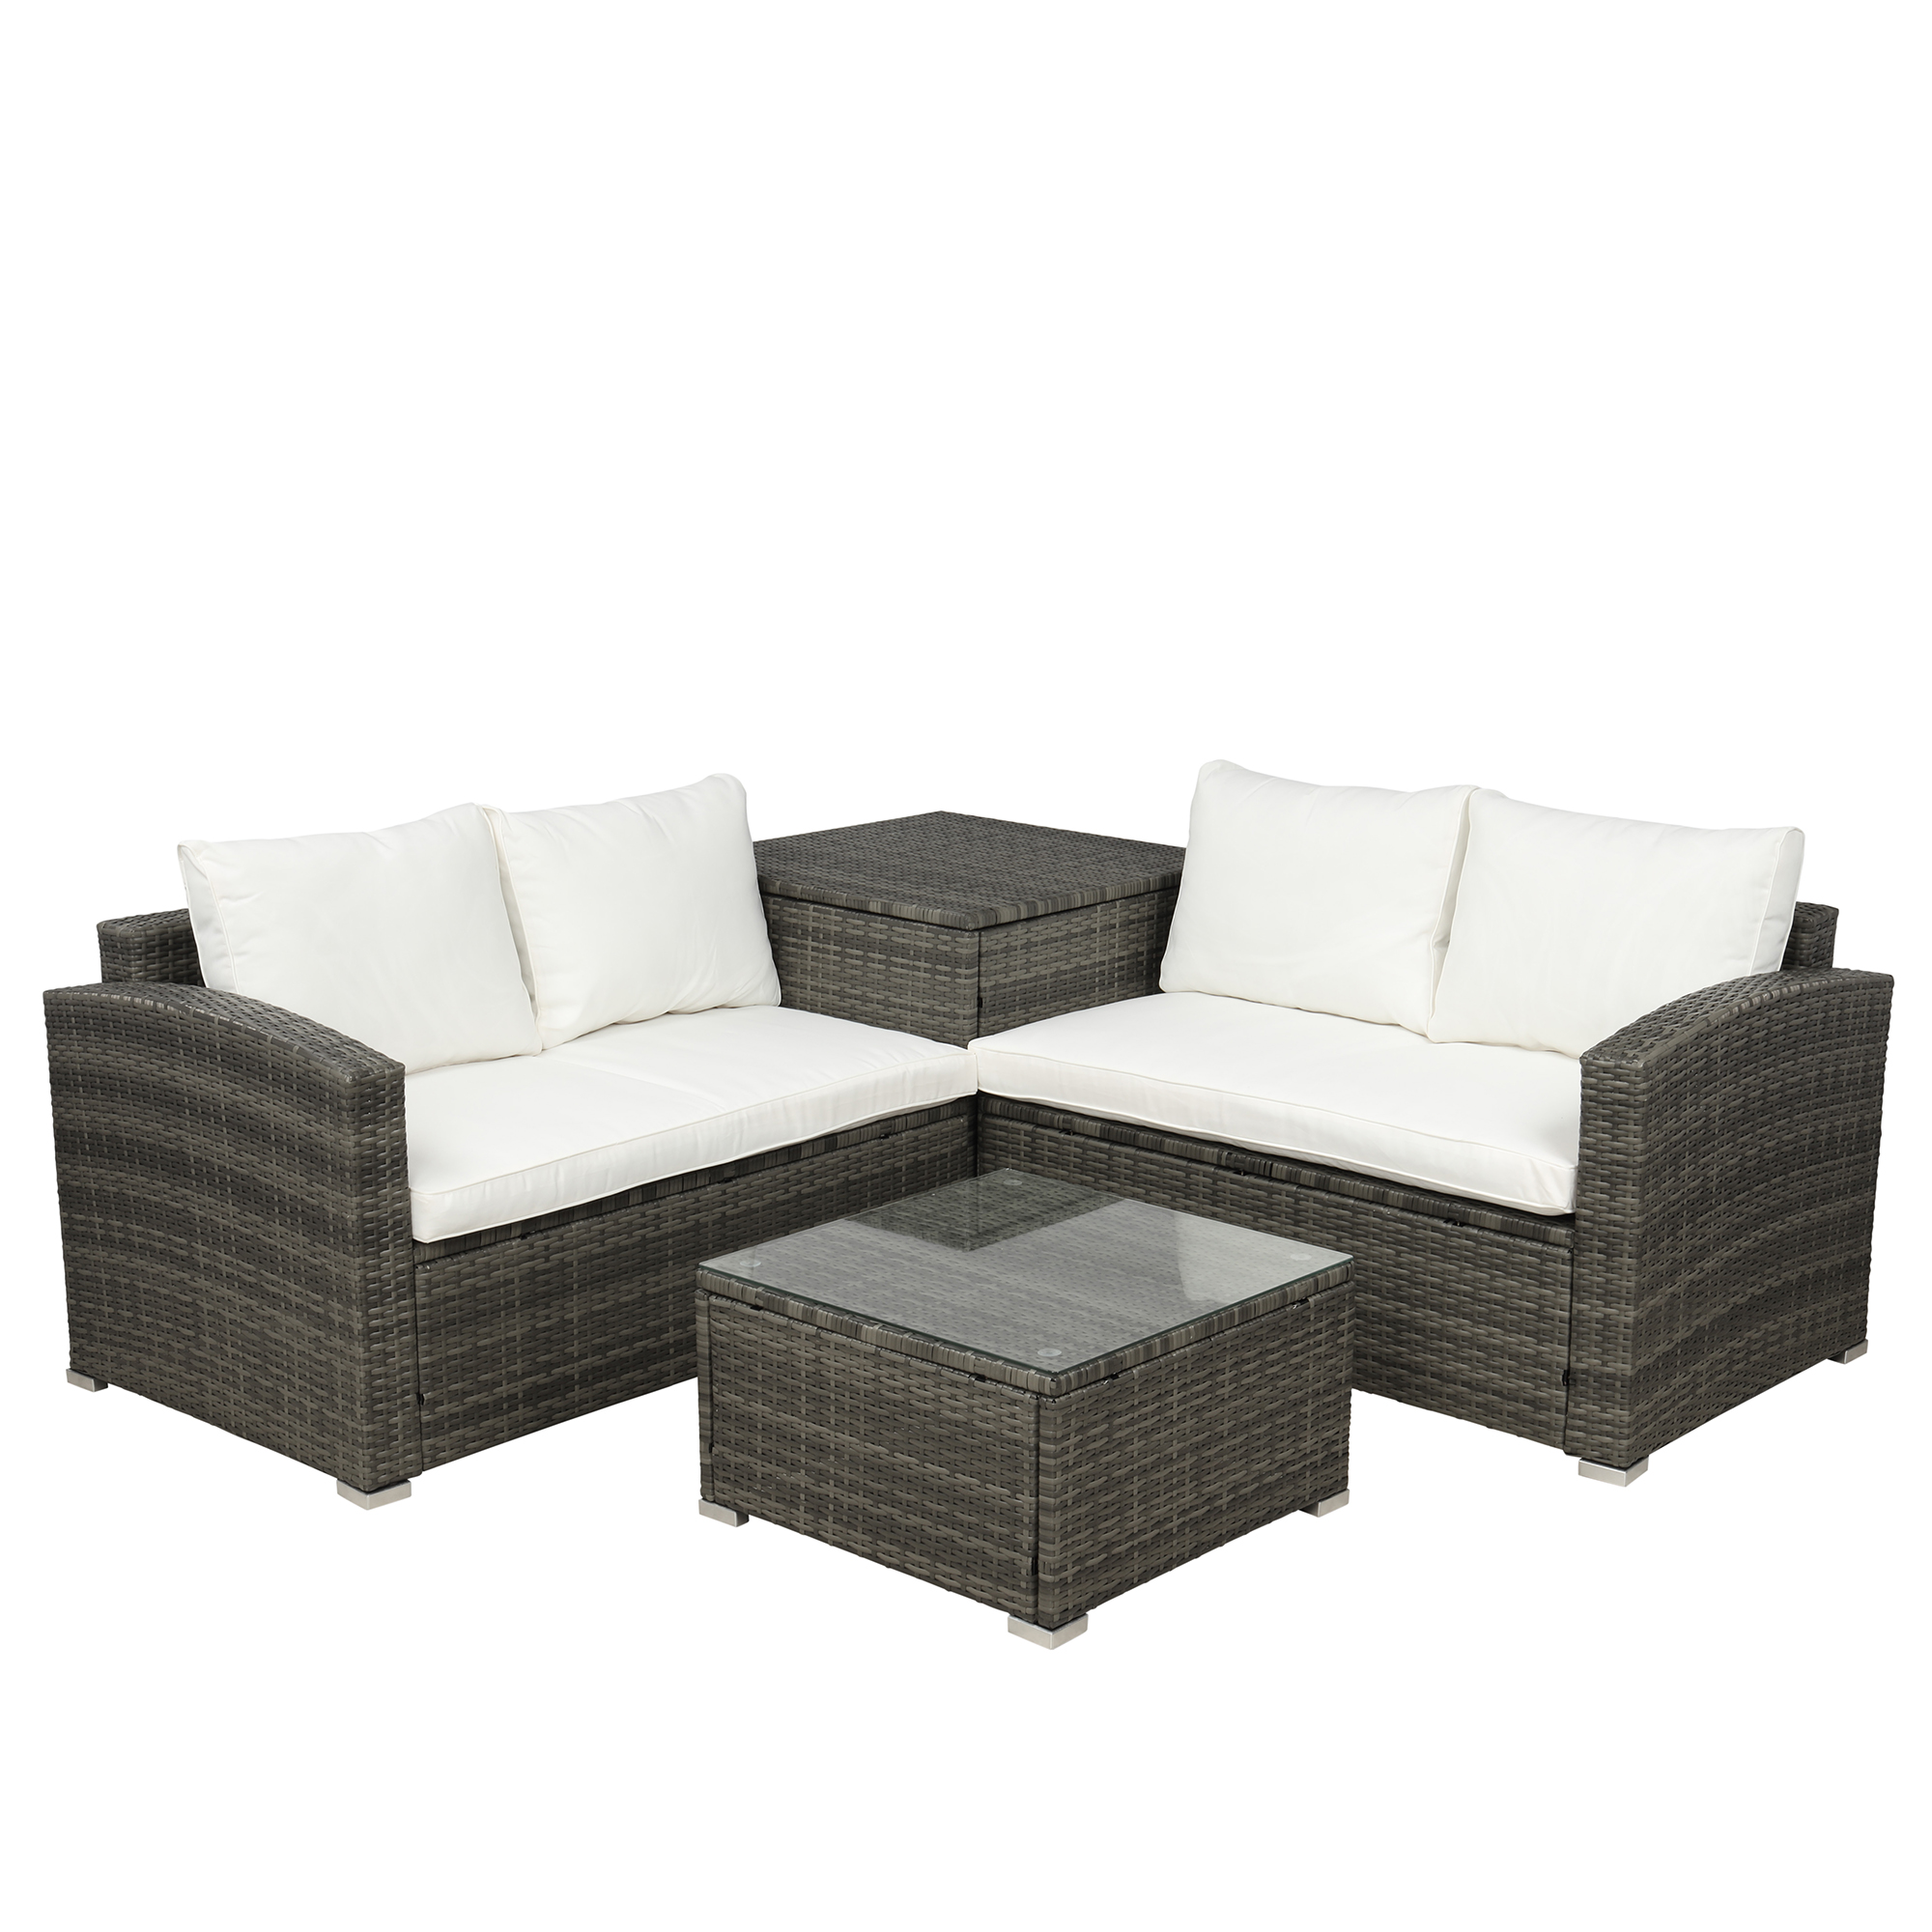 Outdoor Patio Furniture Set, 4-Piece Gray Wicker Patio Furniture Sets, Rattan Wicker Conversation Set w/L-Seats Sofa, R-Seats Sofa, Cushion box, Glass Dining Table, Padded Cushions, Beige, S13126 - image 1 of 7